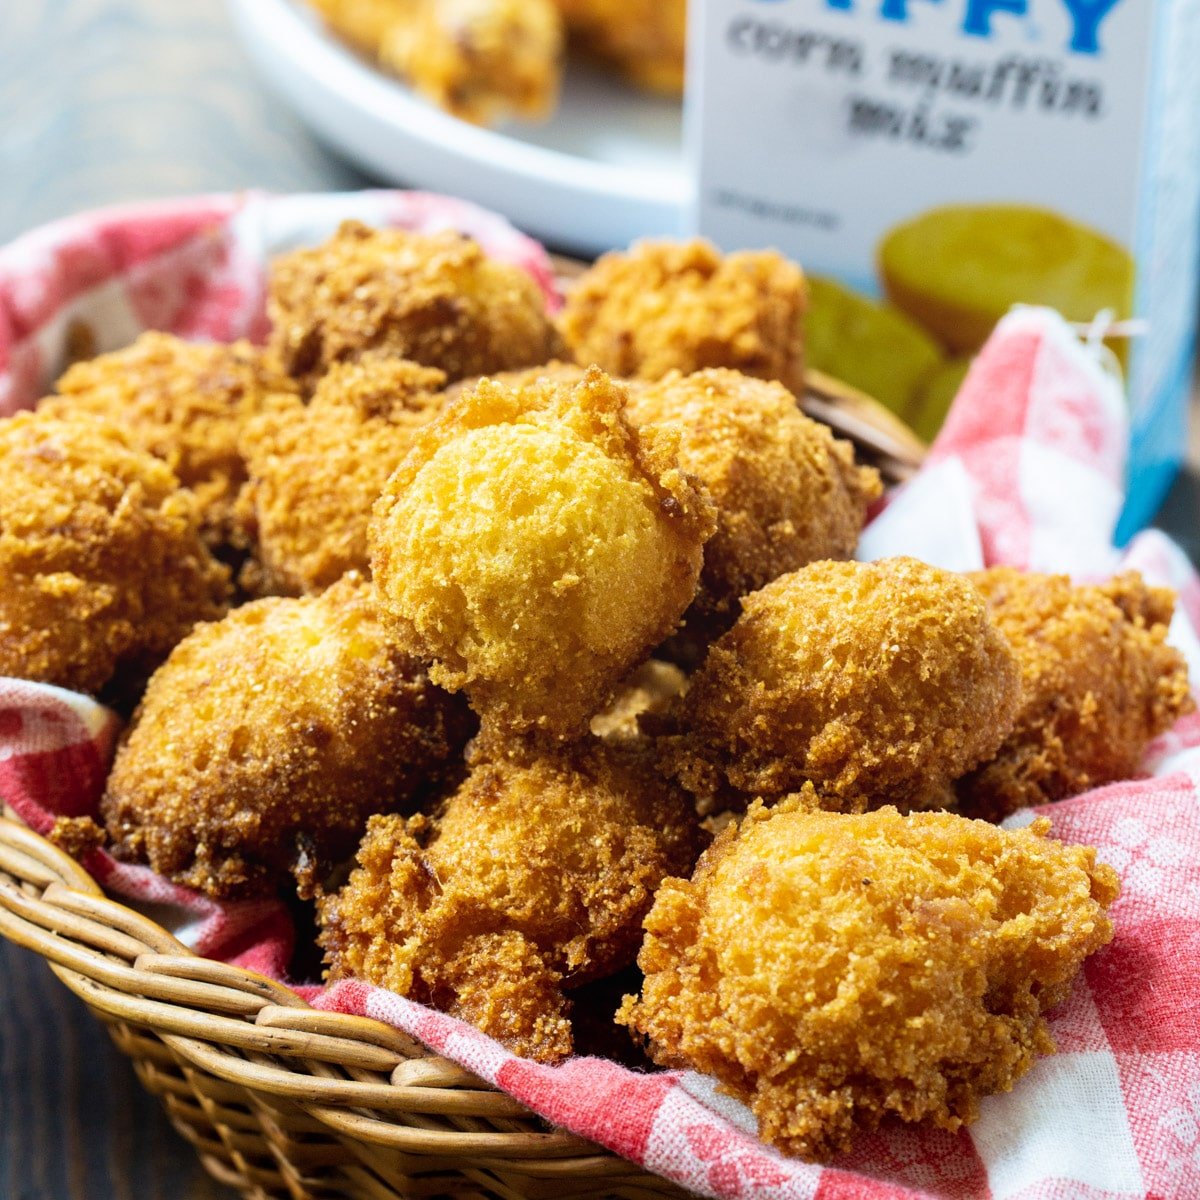 Hush Puppies in a basket.